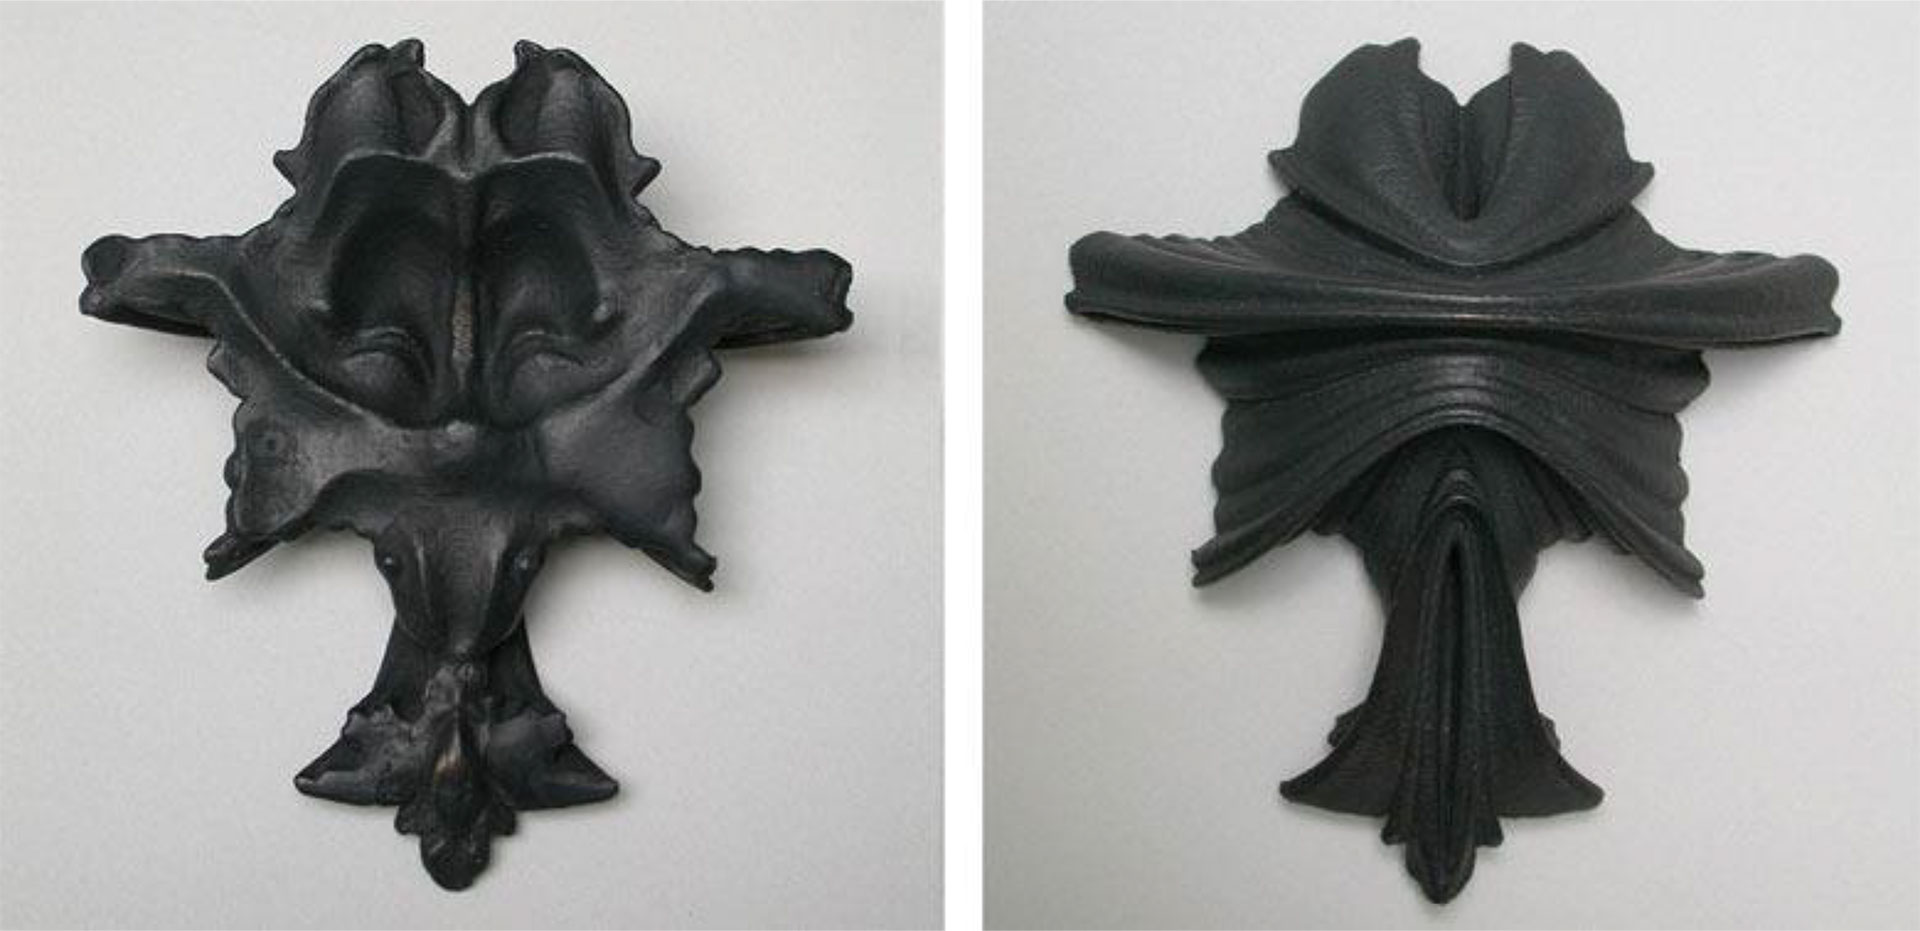 Suzanne Anker, Rorschach series (Tarantula), 2004-05. Bronze, Edition of 3. 4.5” x 5” x 1”. $4,000. Also available in 4.5” x 5” x 1”. Plaster and resin; ivory white or painted black, Edition of 6. $500.